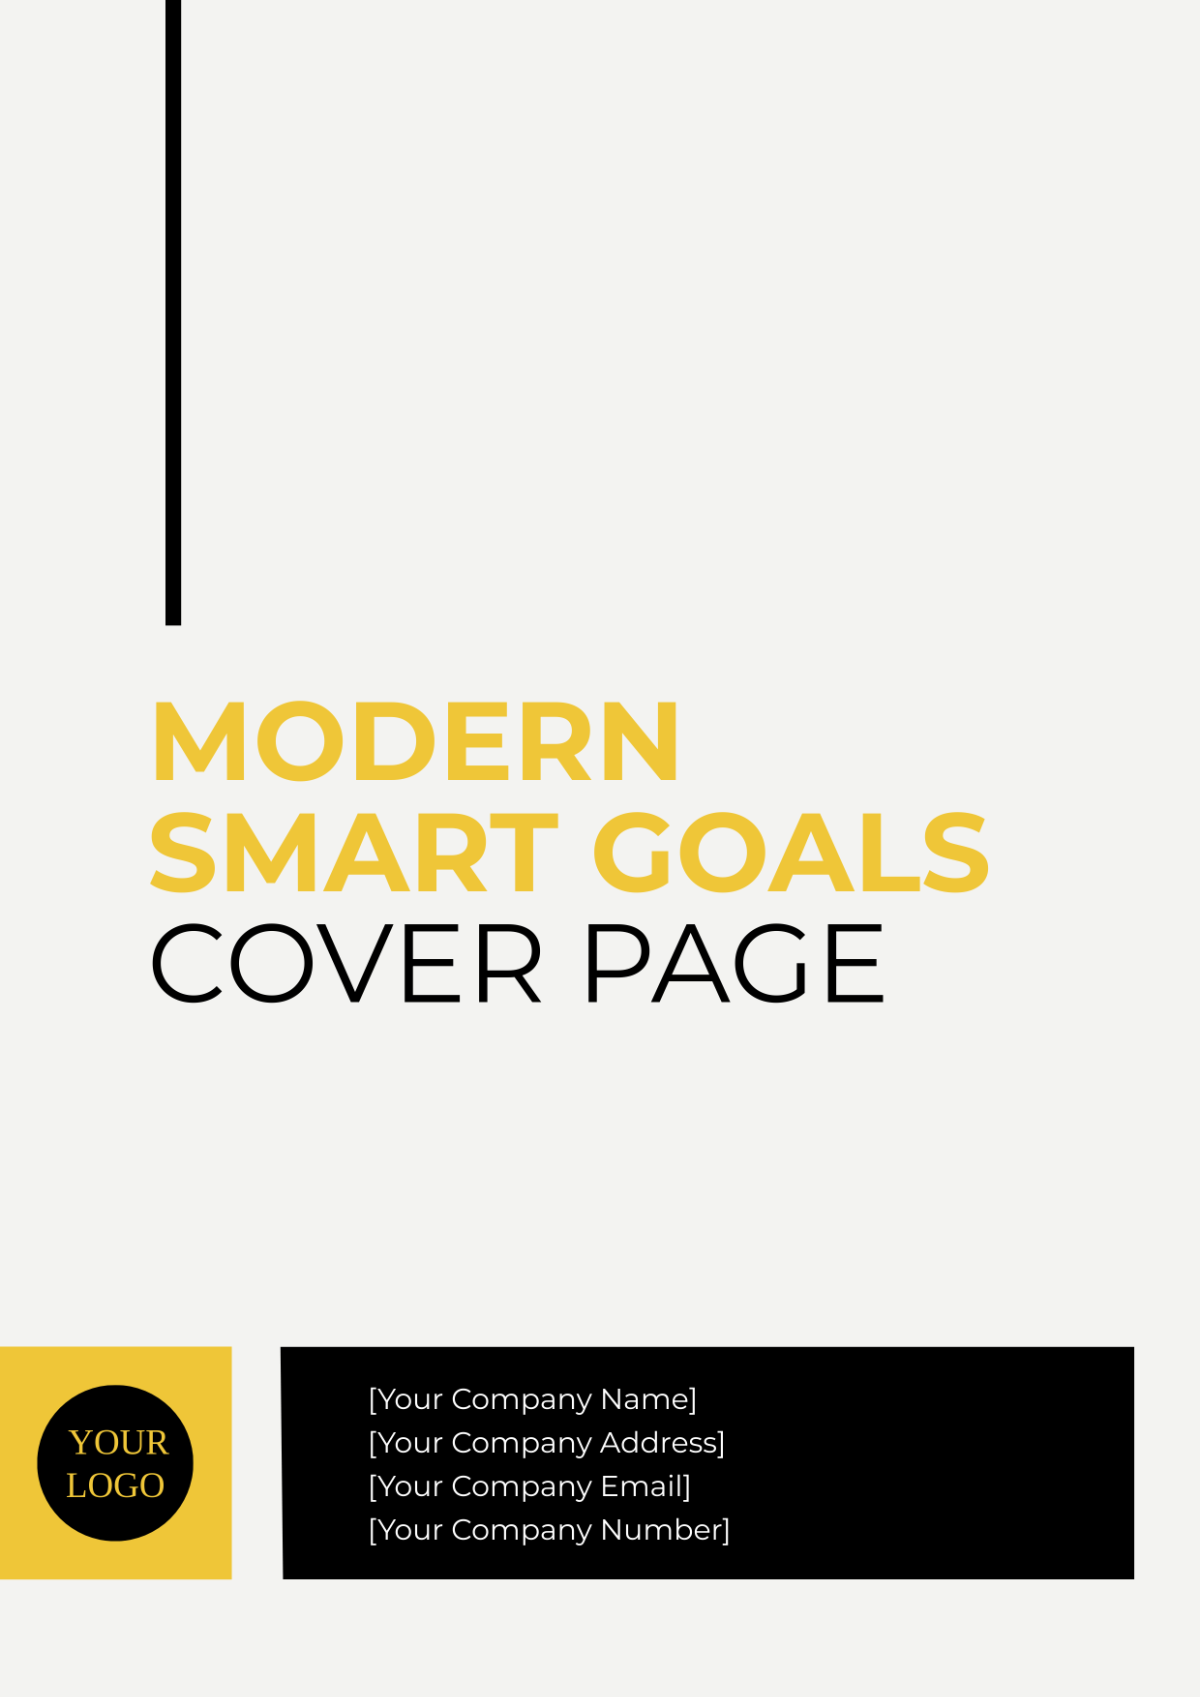 Modern SMART Goals Cover Page